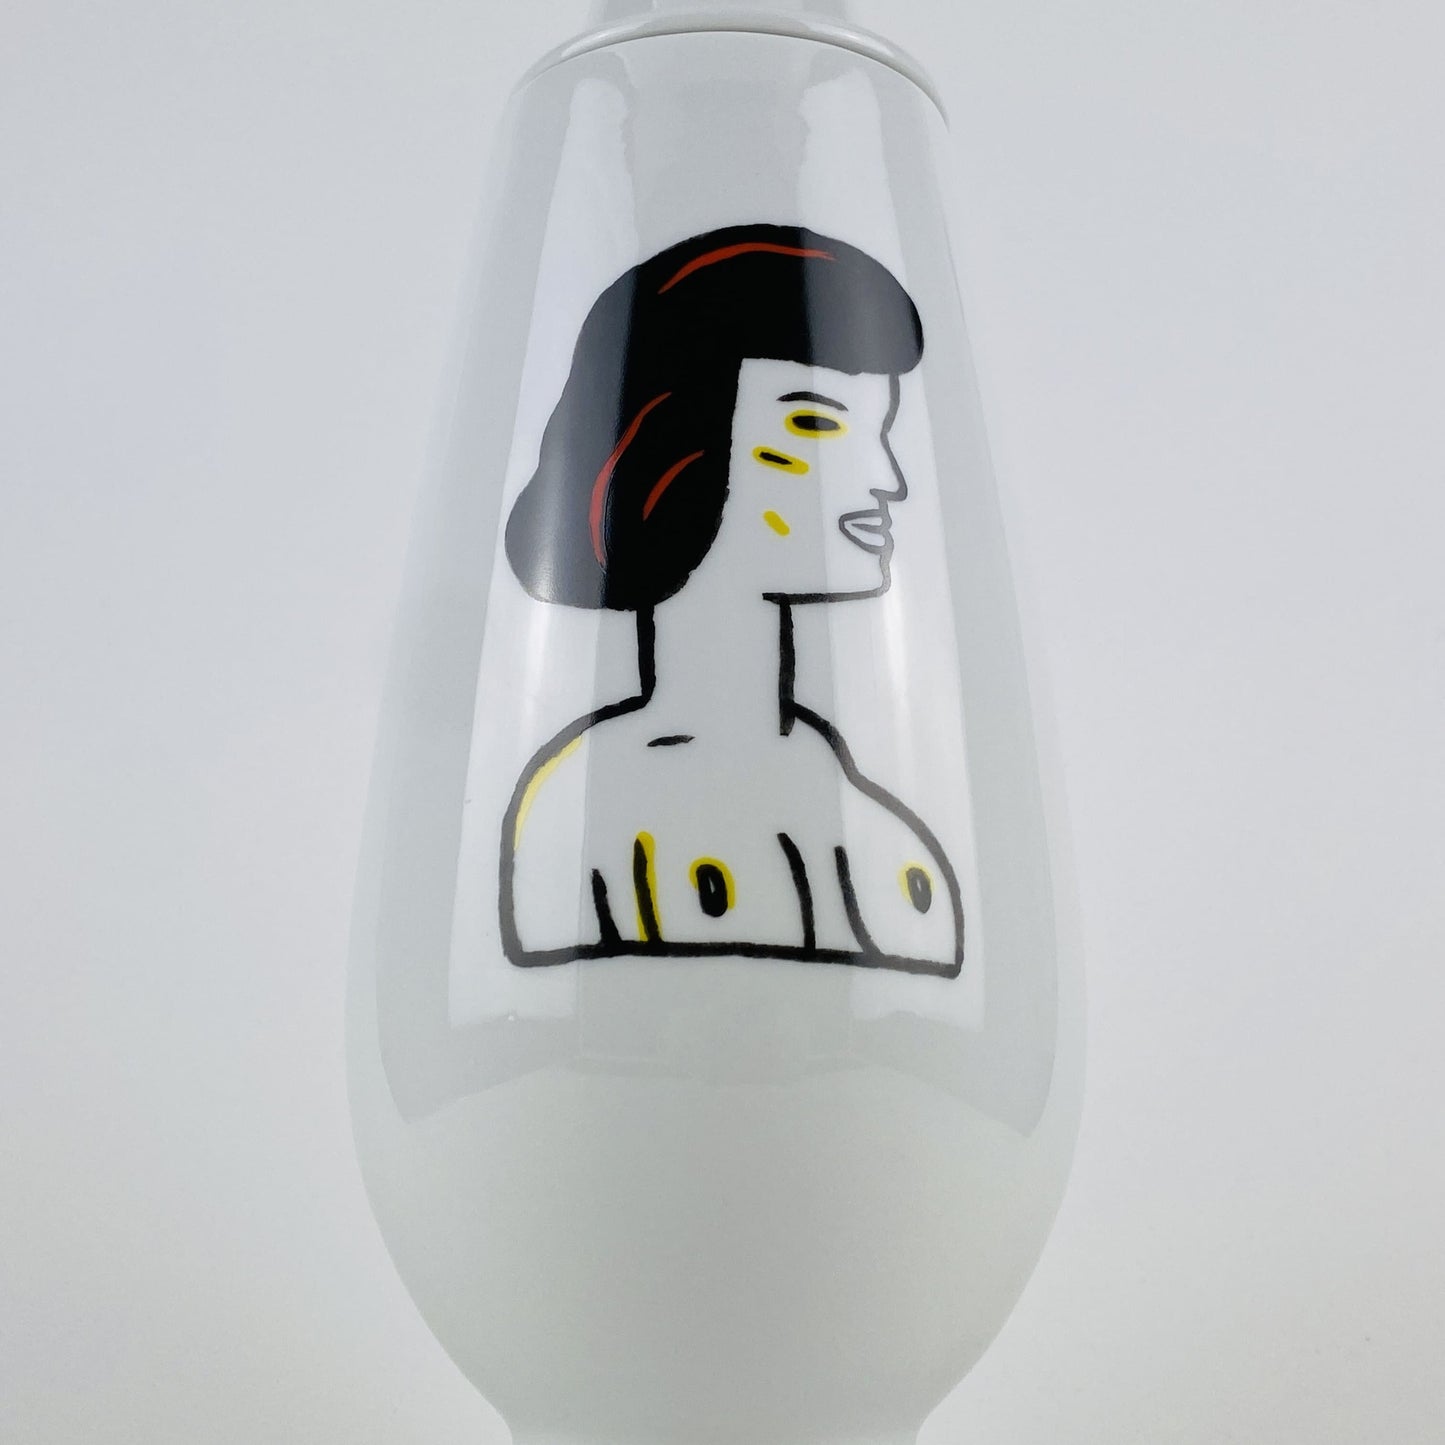 Alessi Tendentse Vase by Guillermo Tejeda for Alessandro Mendini 100% Make-up series - No. 83